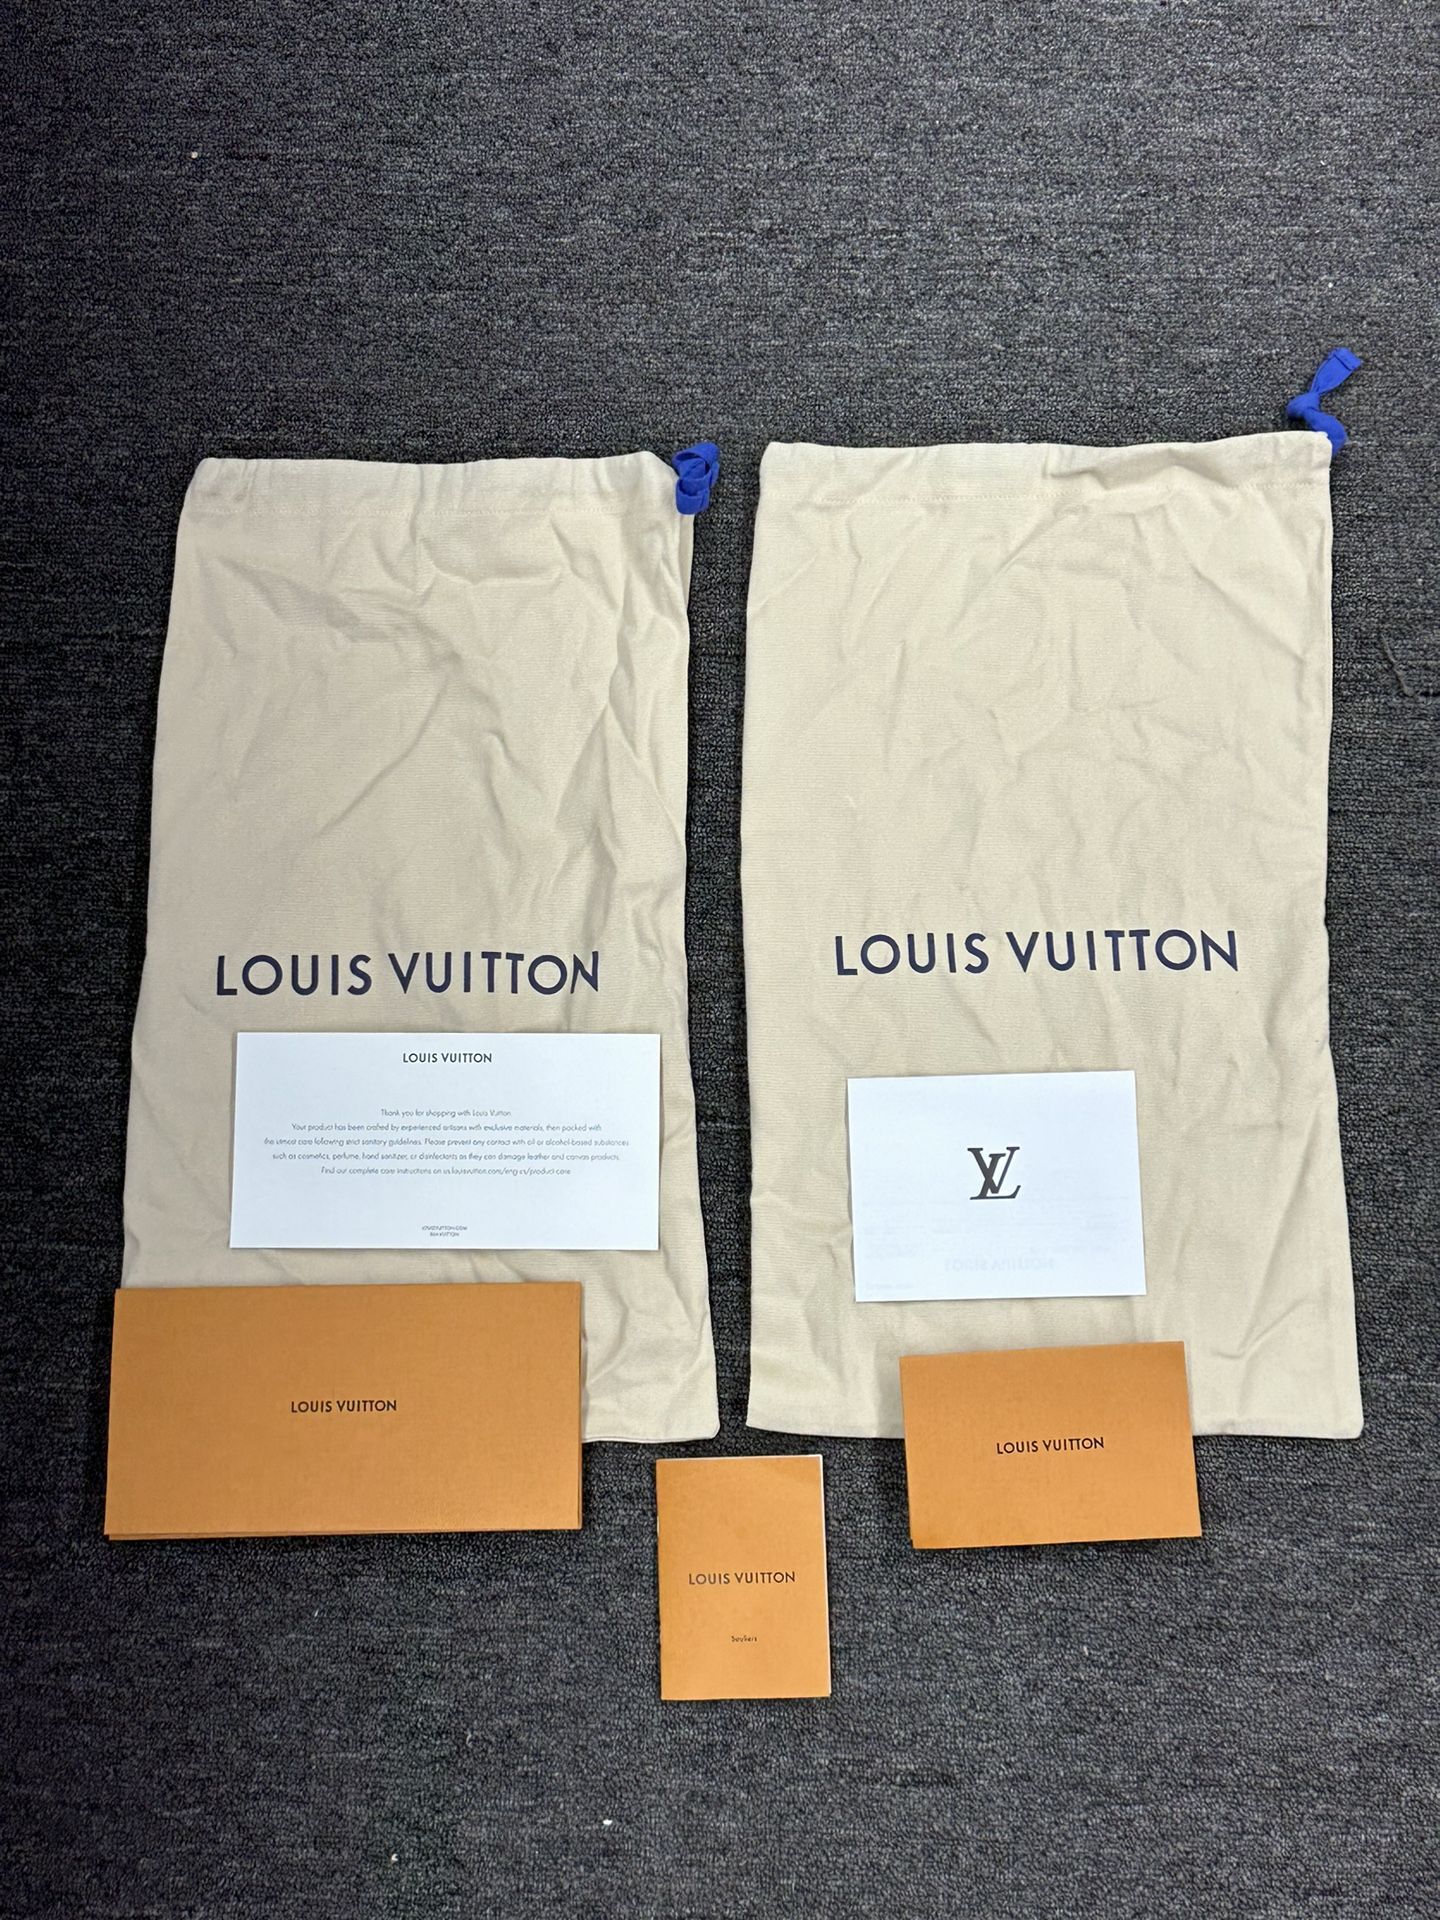 Louis Vuitton Large Orange Magnetic Storage Gift Box w/ Envelope & Dust Bags  for Sale in Irvine, CA - OfferUp